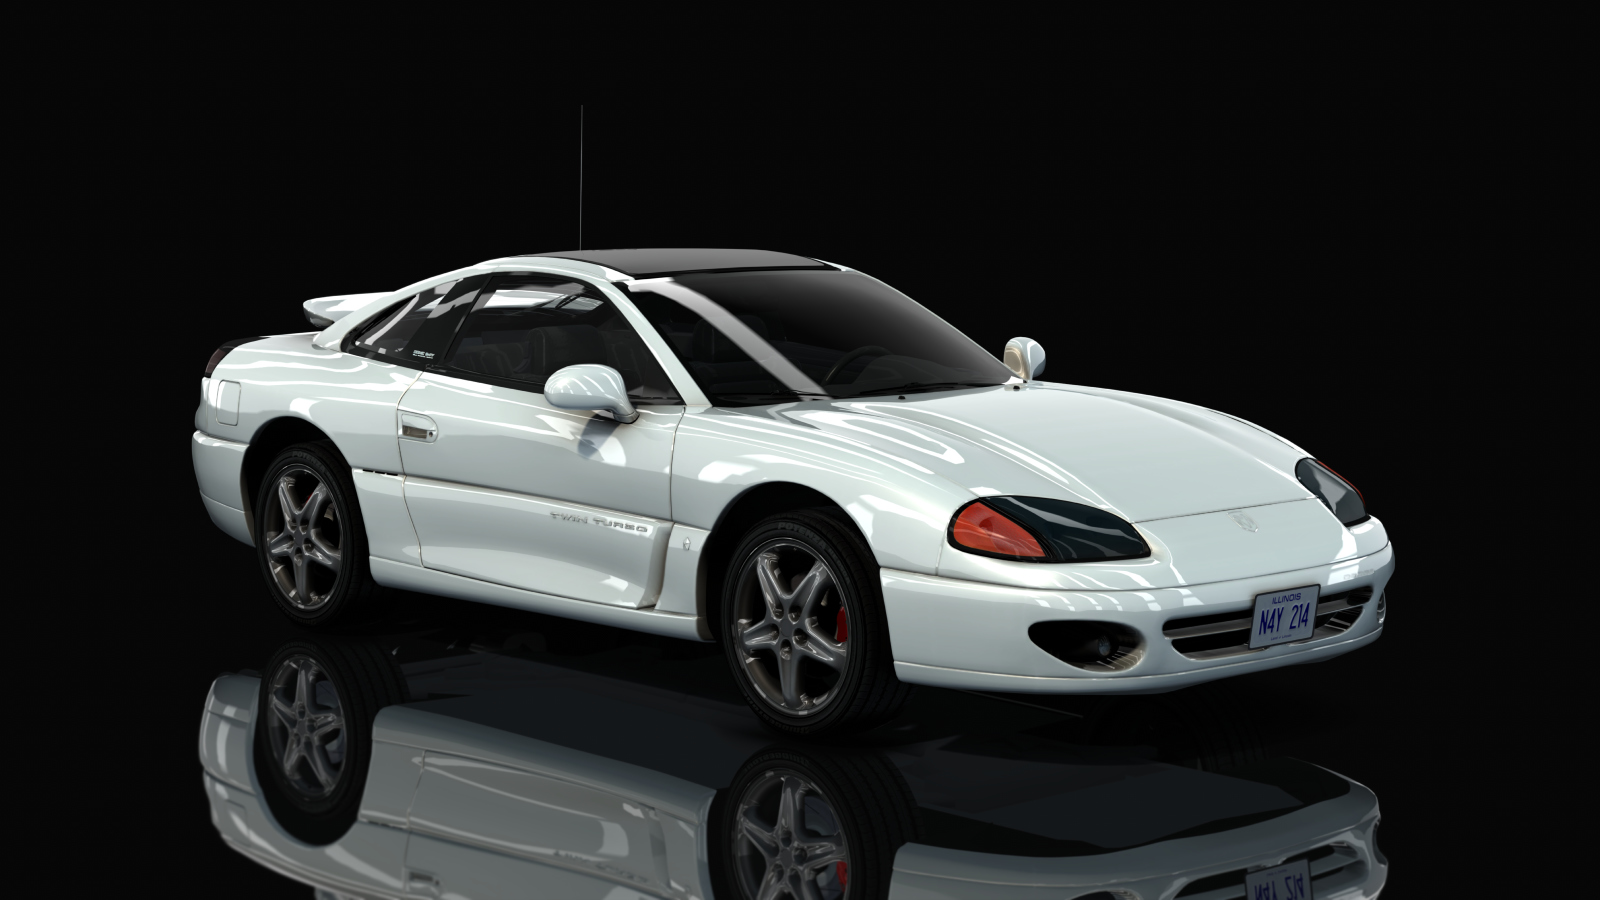 Dodge Stealth Turbo R/T 1996 Preview Image